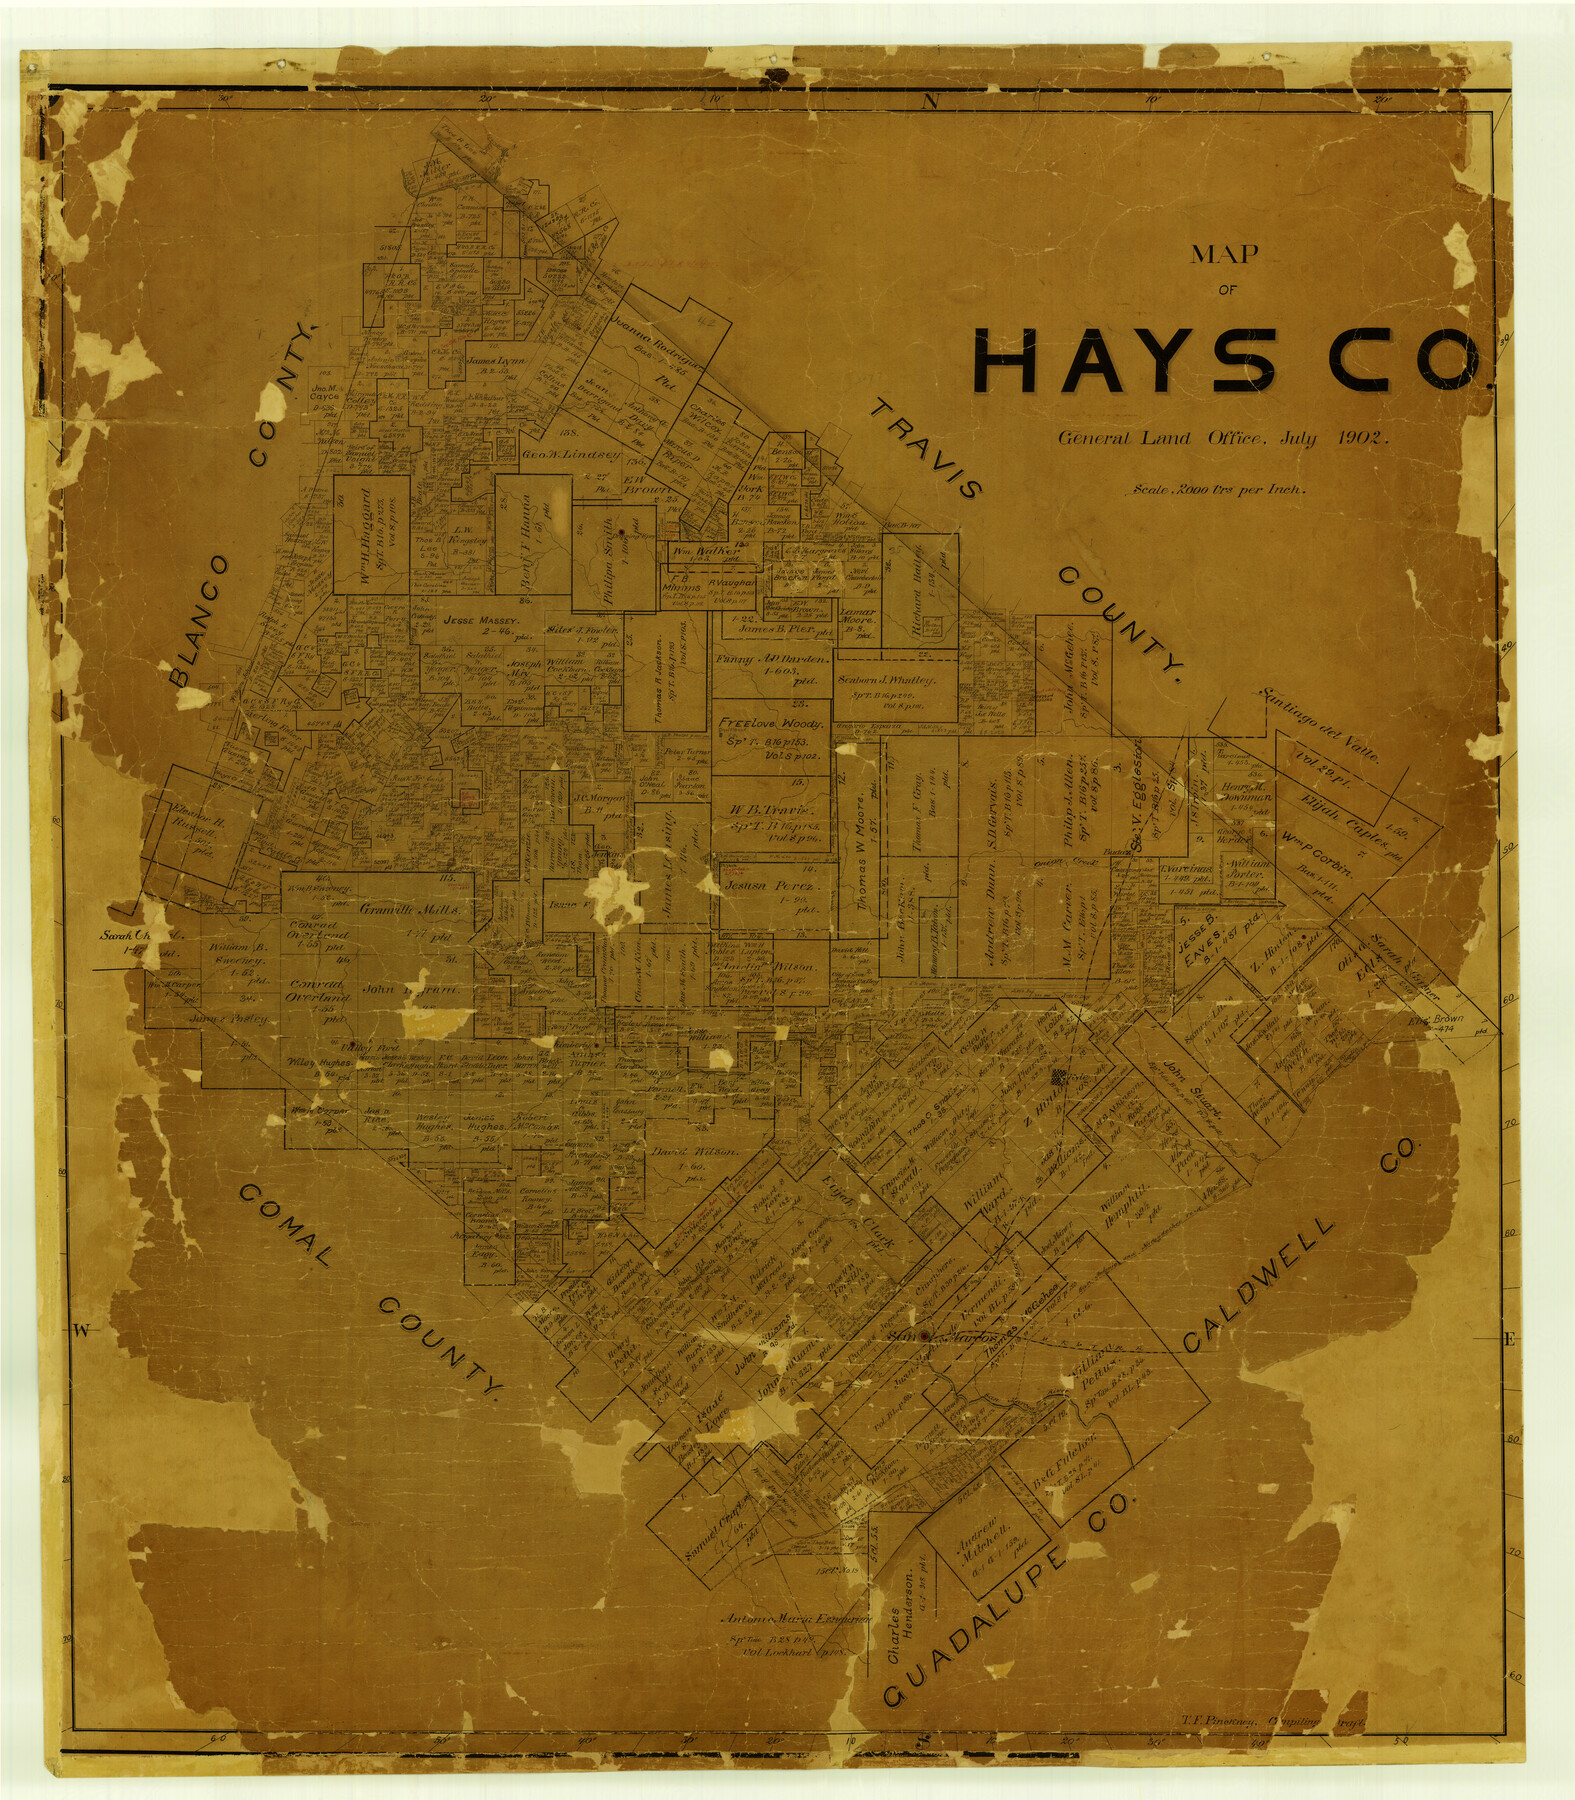 4679, Map of Hays Co., General Map Collection